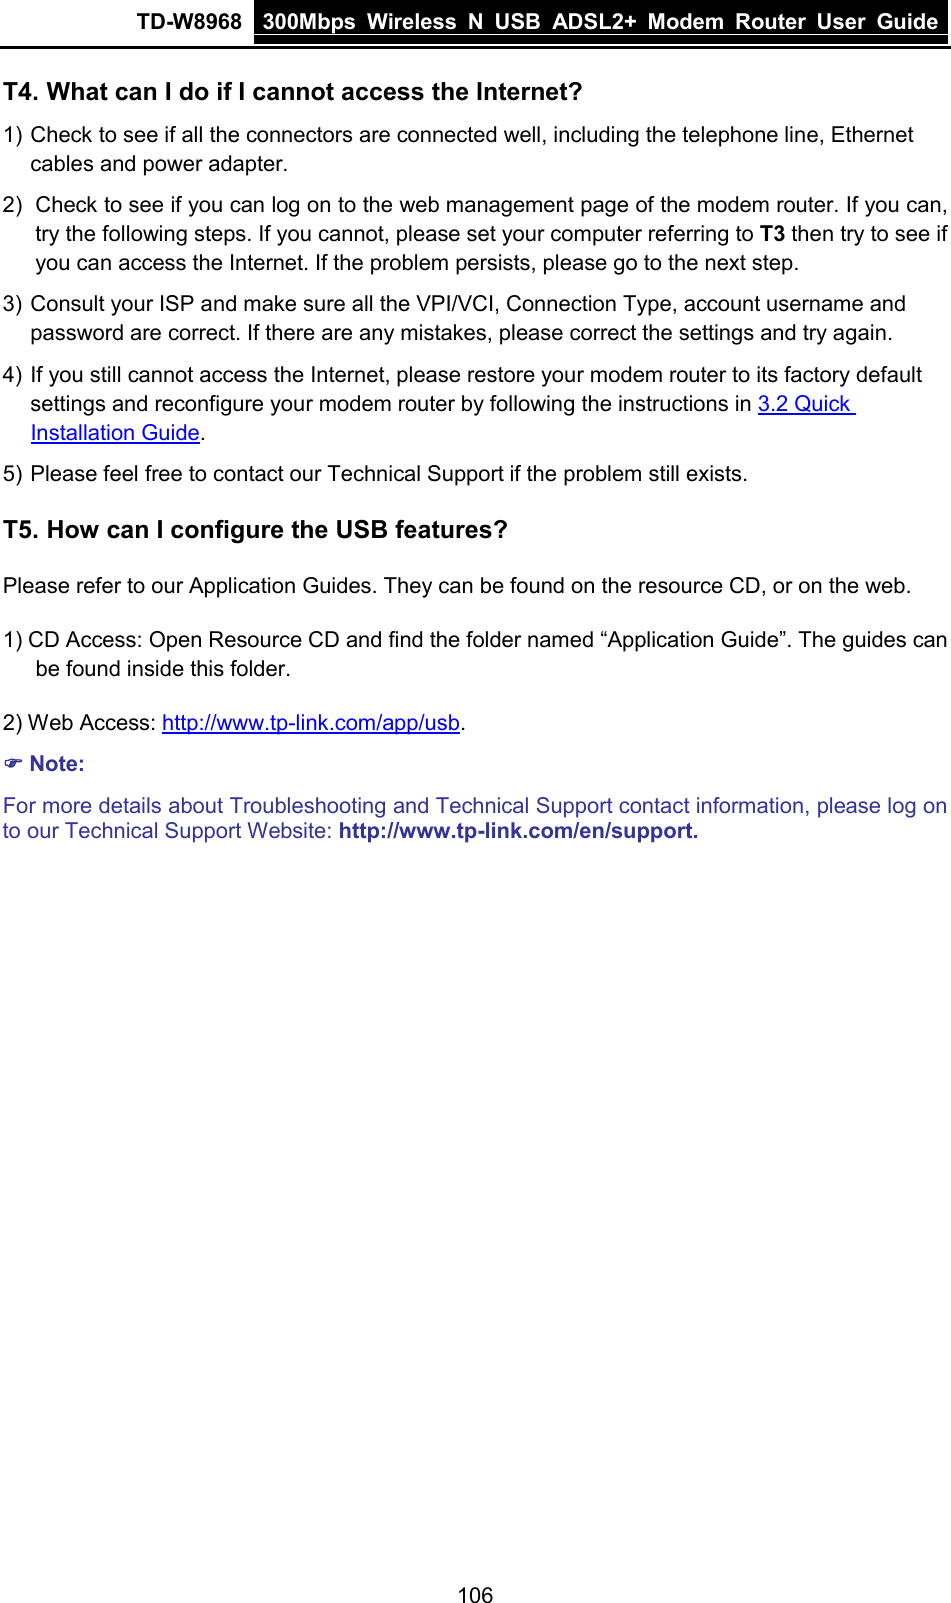 TD-W8968 300Mbps Wireless  N  USB ADSL2+ Modem Router  User Guide  T4. What can I do if I cannot access the Internet? 1) Check to see if all the connectors are connected well, including the telephone line, Ethernet cables and power adapter. 2) Check to see if you can log on to the web management page of the modem router. If you can, try the following steps. If you cannot, please set your computer referring to T3 then try to see if you can access the Internet. If the problem persists, please go to the next step. 3) Consult your ISP and make sure all the VPI/VCI, Connection Type, account username and password are correct. If there are any mistakes, please correct the settings and try again. 4) If you still cannot access the Internet, please restore your modem router to its factory default settings and reconfigure your modem router by following the instructions in 3.2 Quick Installation Guide. 5) Please feel free to contact our Technical Support if the problem still exists. T5. How can I configure the USB features? Please refer to our Application Guides. They can be found on the resource CD, or on the web. 1) CD Access: Open Resource CD and find the folder named “Application Guide”. The guides can be found inside this folder. 2) Web Access: http://www.tp-link.com/app/usb.  Note: For more details about Troubleshooting and Technical Support contact information, please log on to our Technical Support Website: http://www.tp-link.com/en/support.  106 